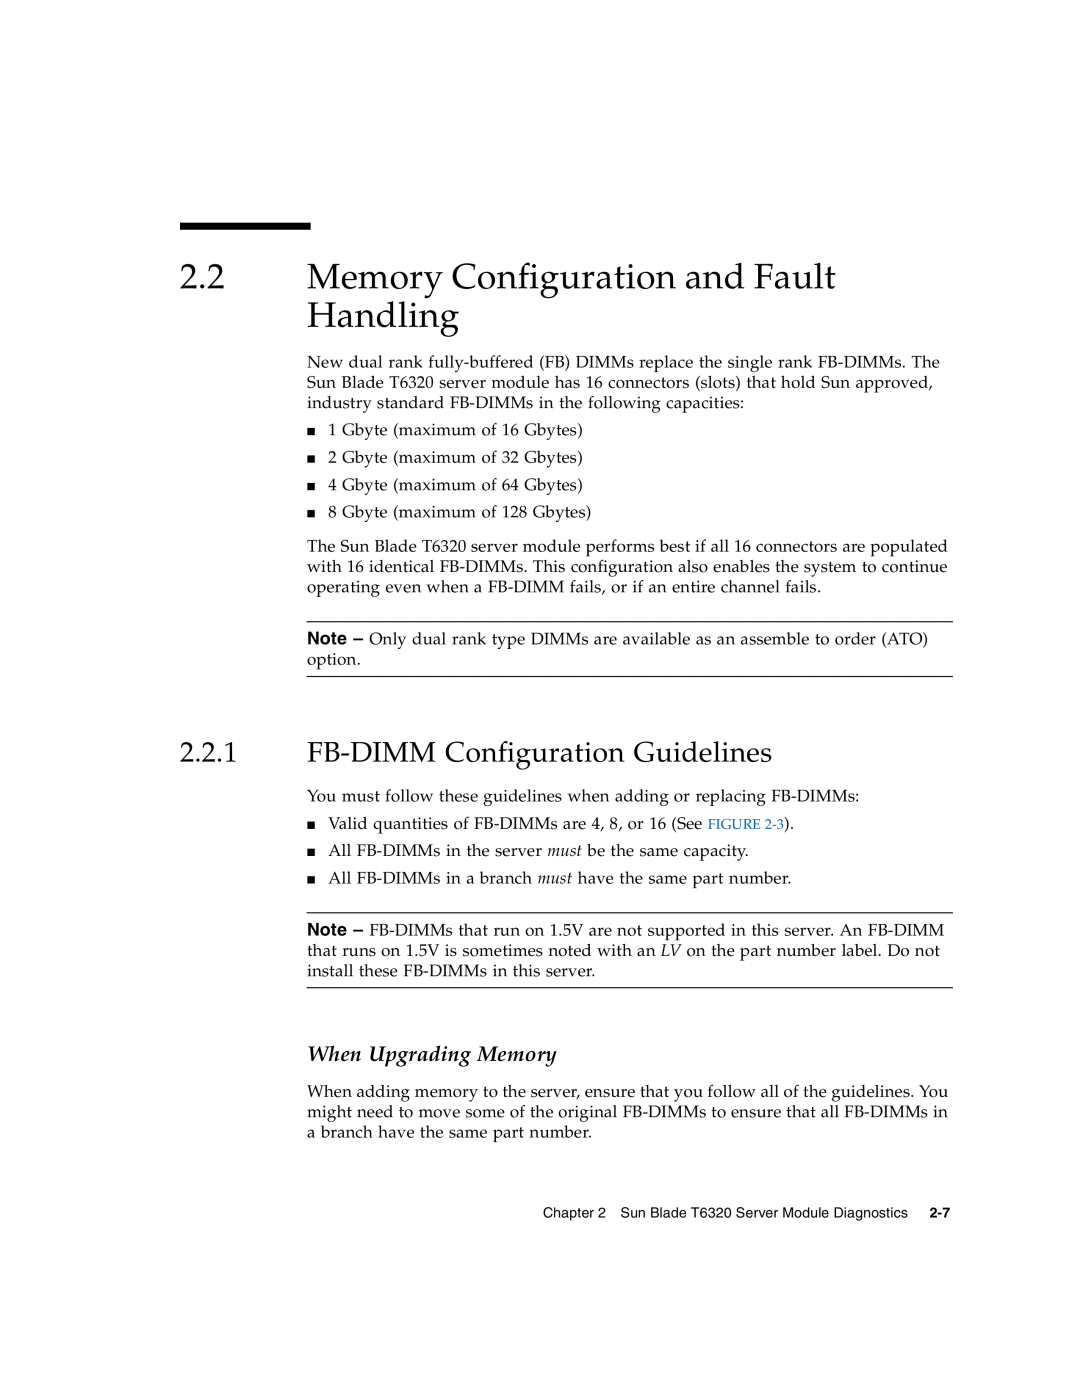 Sun Microsystems T6320 Memory Configuration and Fault Handling, FB-DIMM Configuration Guidelines, When Upgrading Memory 